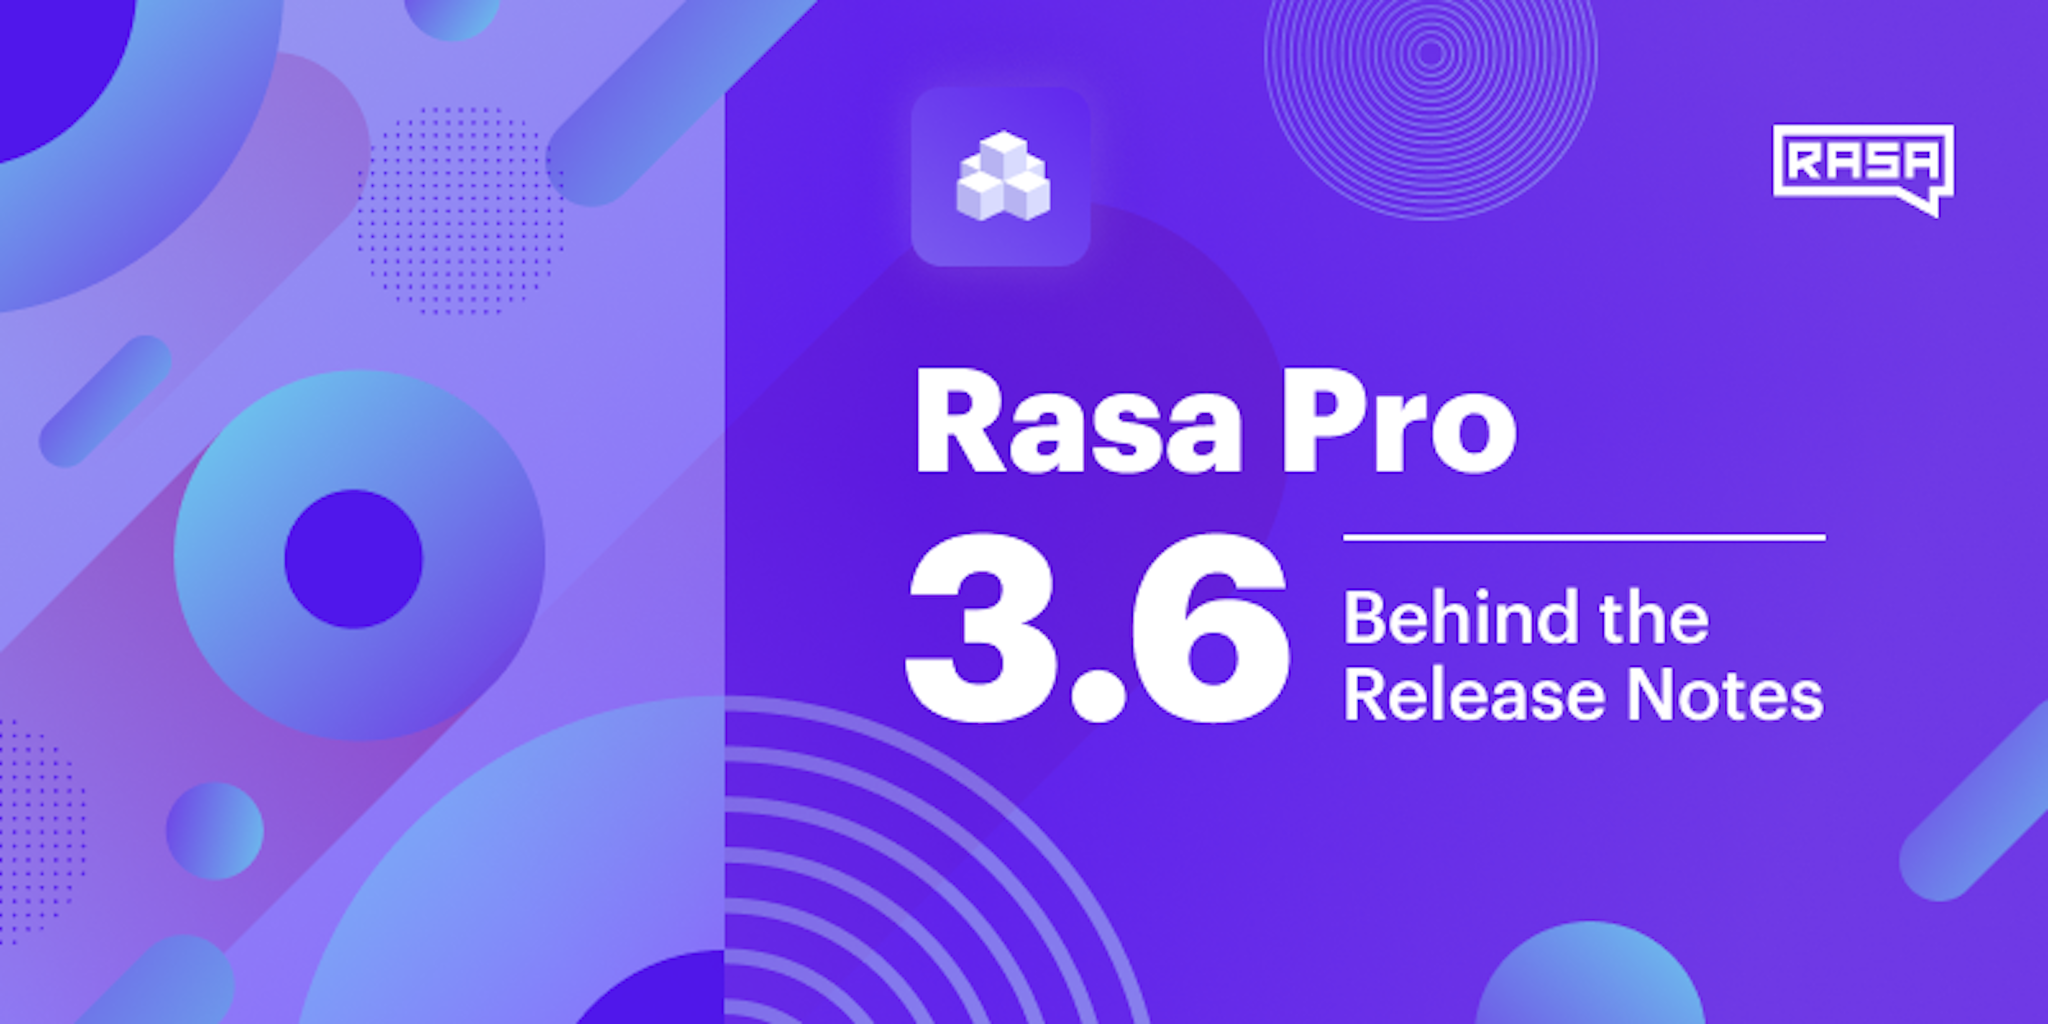 Behind the Release Notes: Rasa Pro 3.6